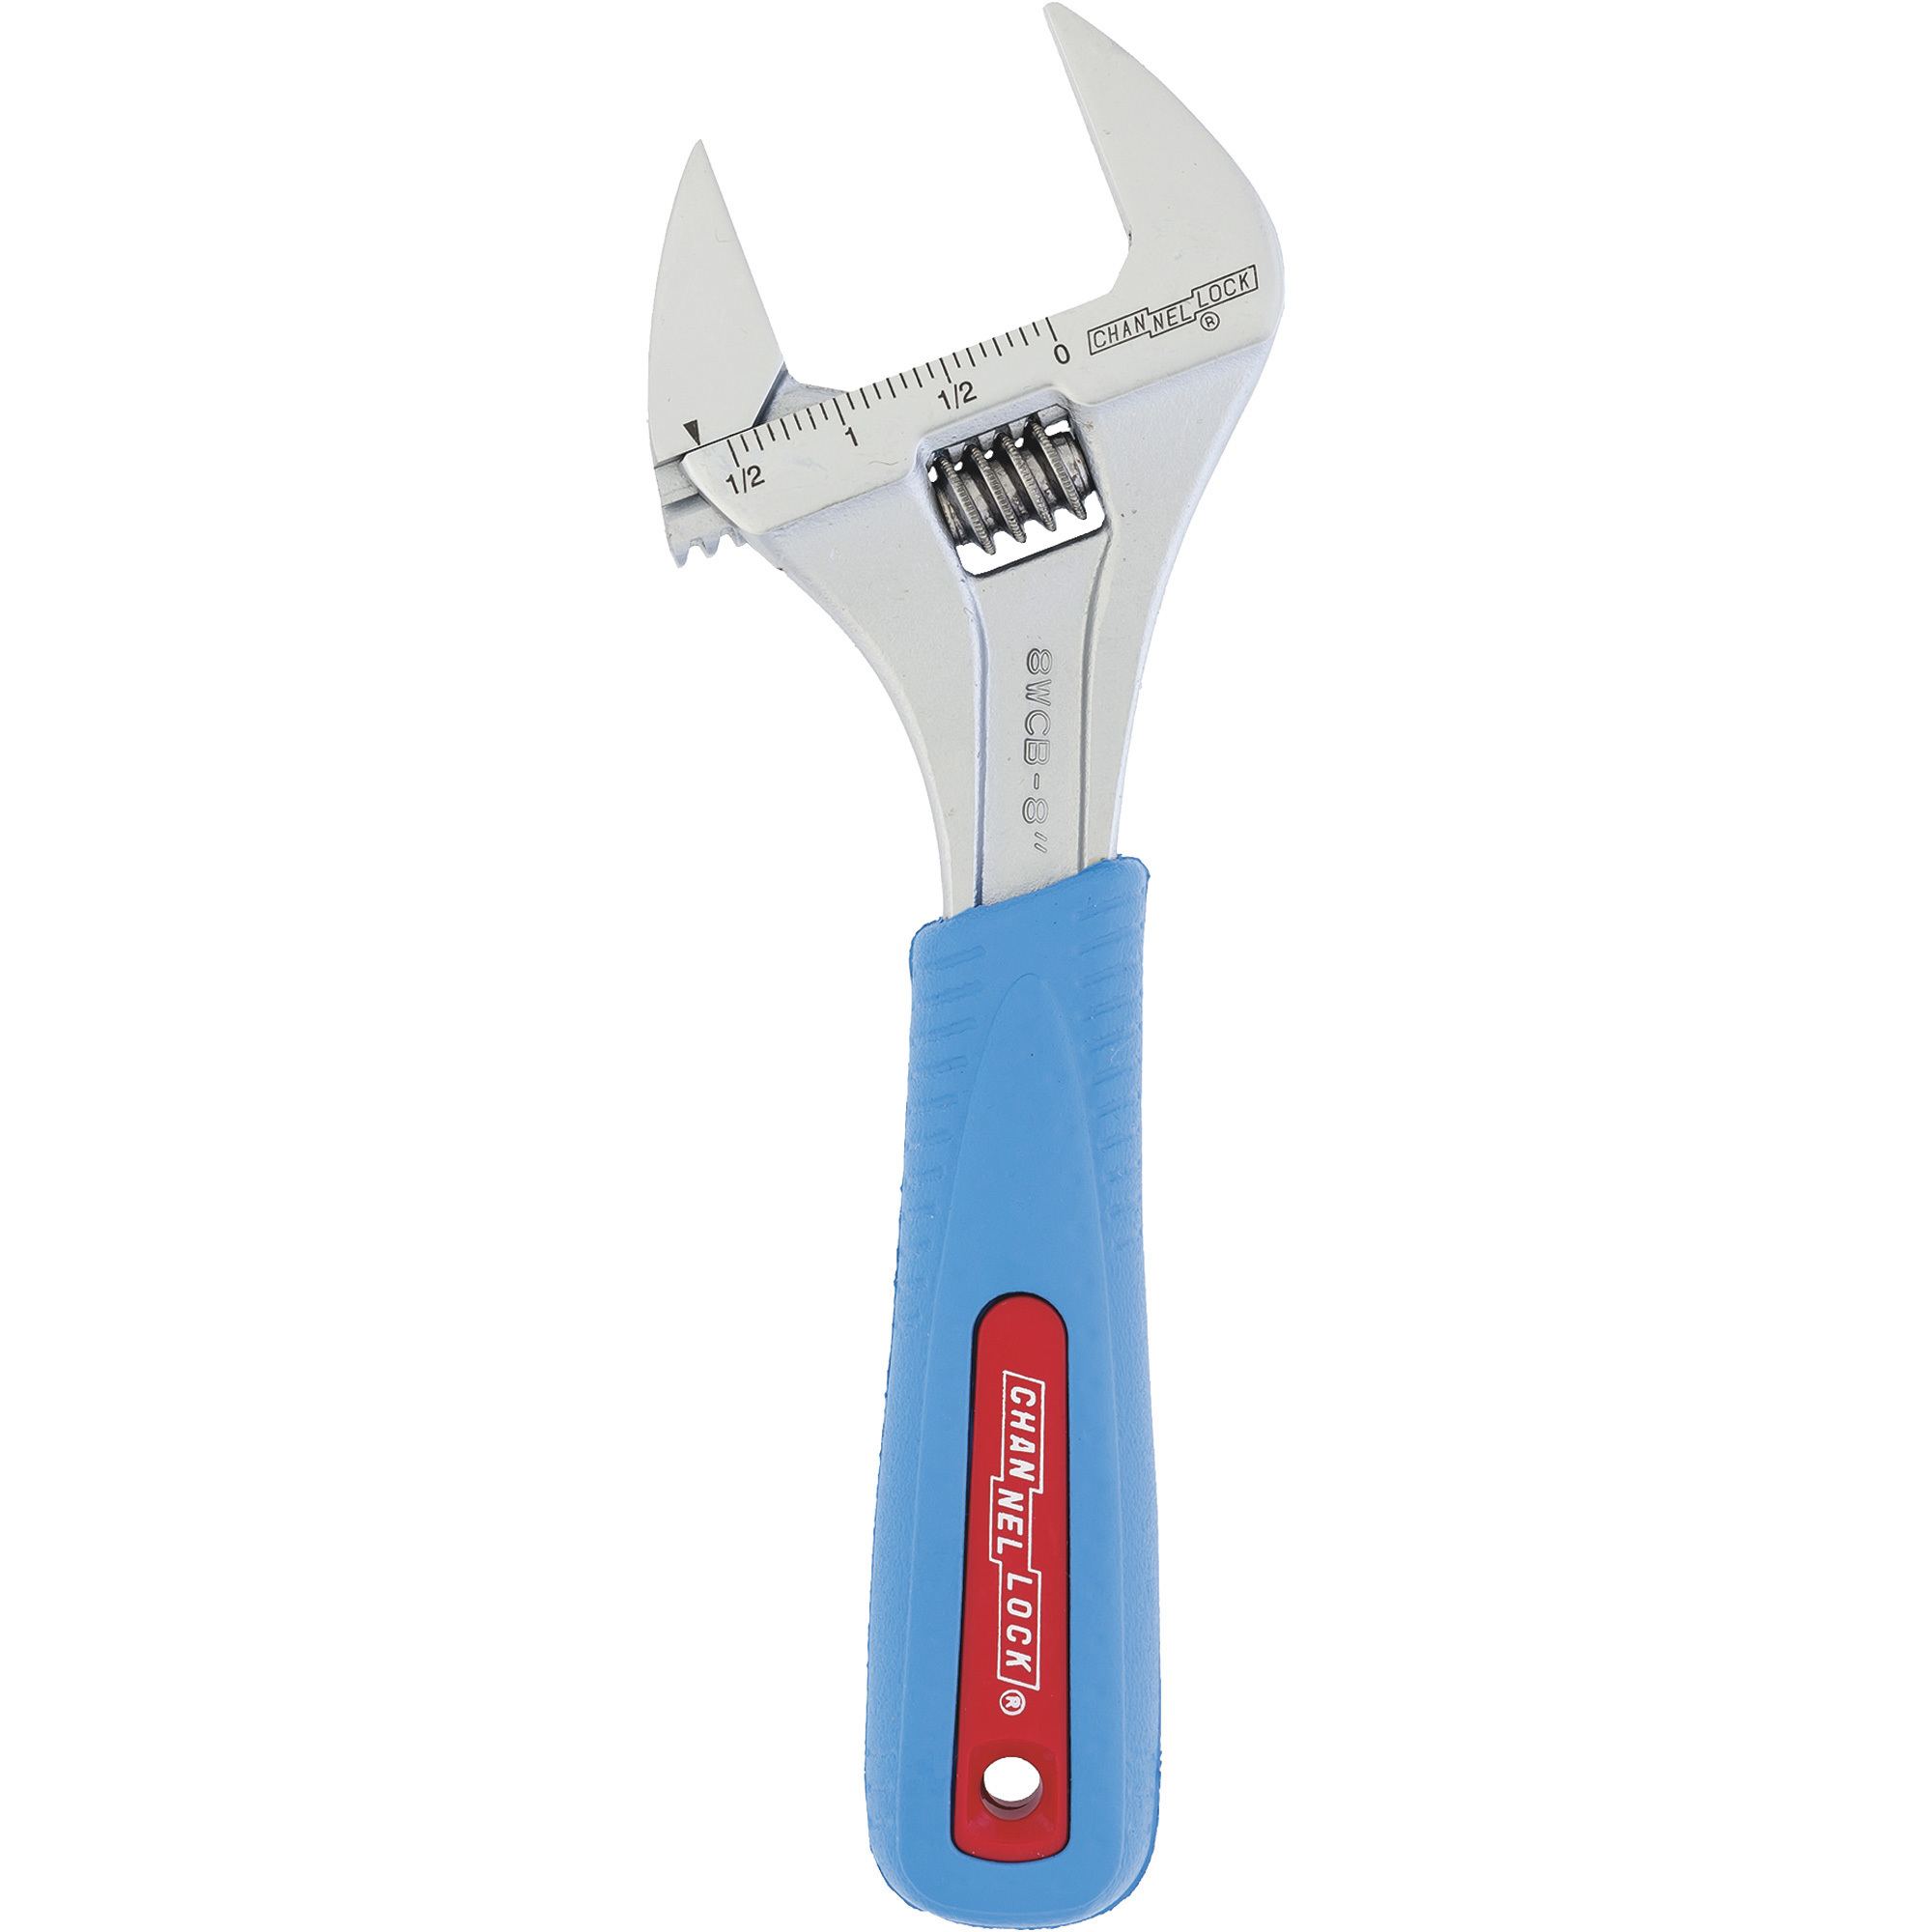 Channellock Wide Opening Adjustable Wrench â 8Inch, Model 8WCB